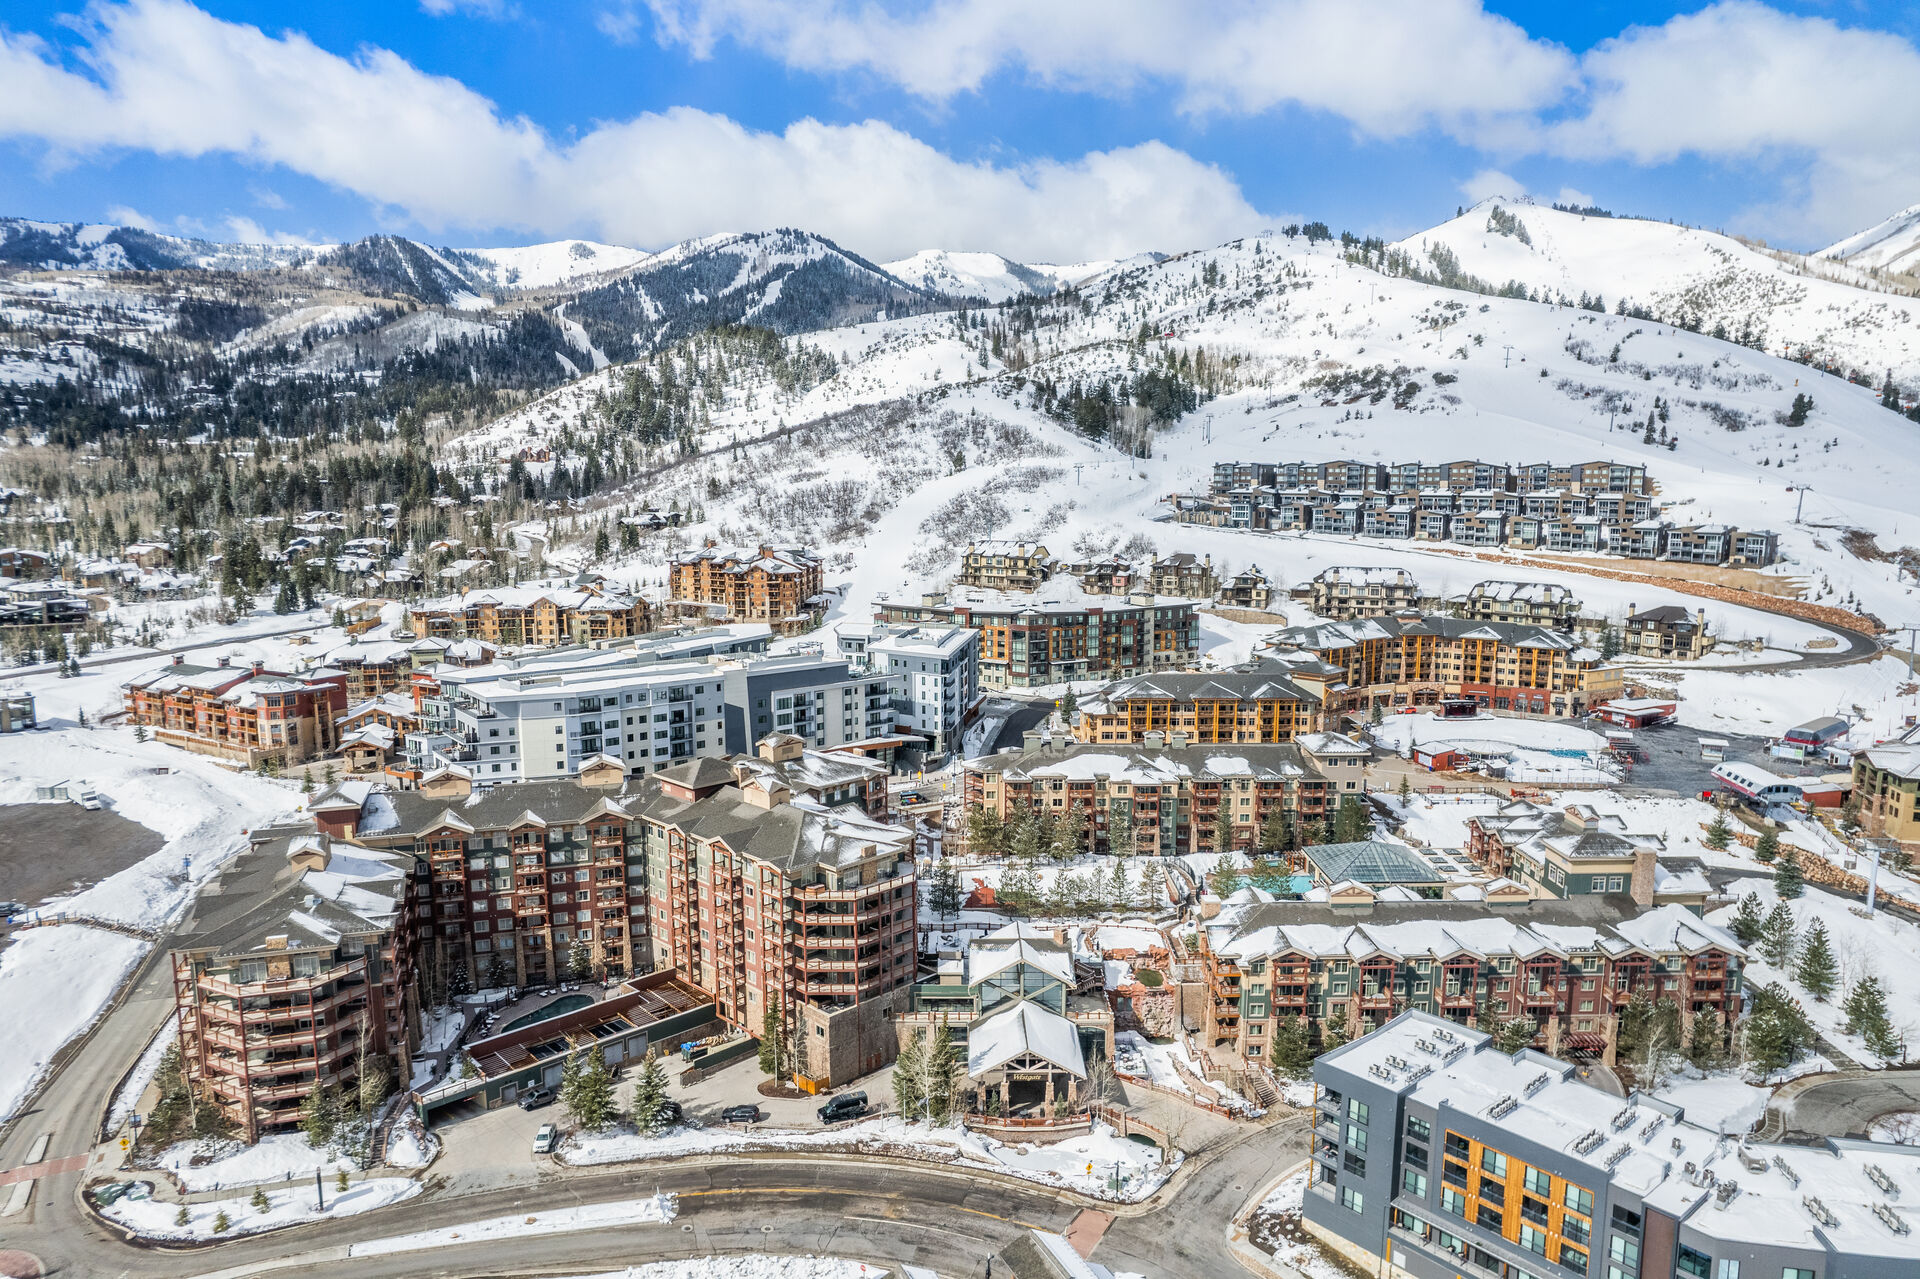 Canyons Village in winter